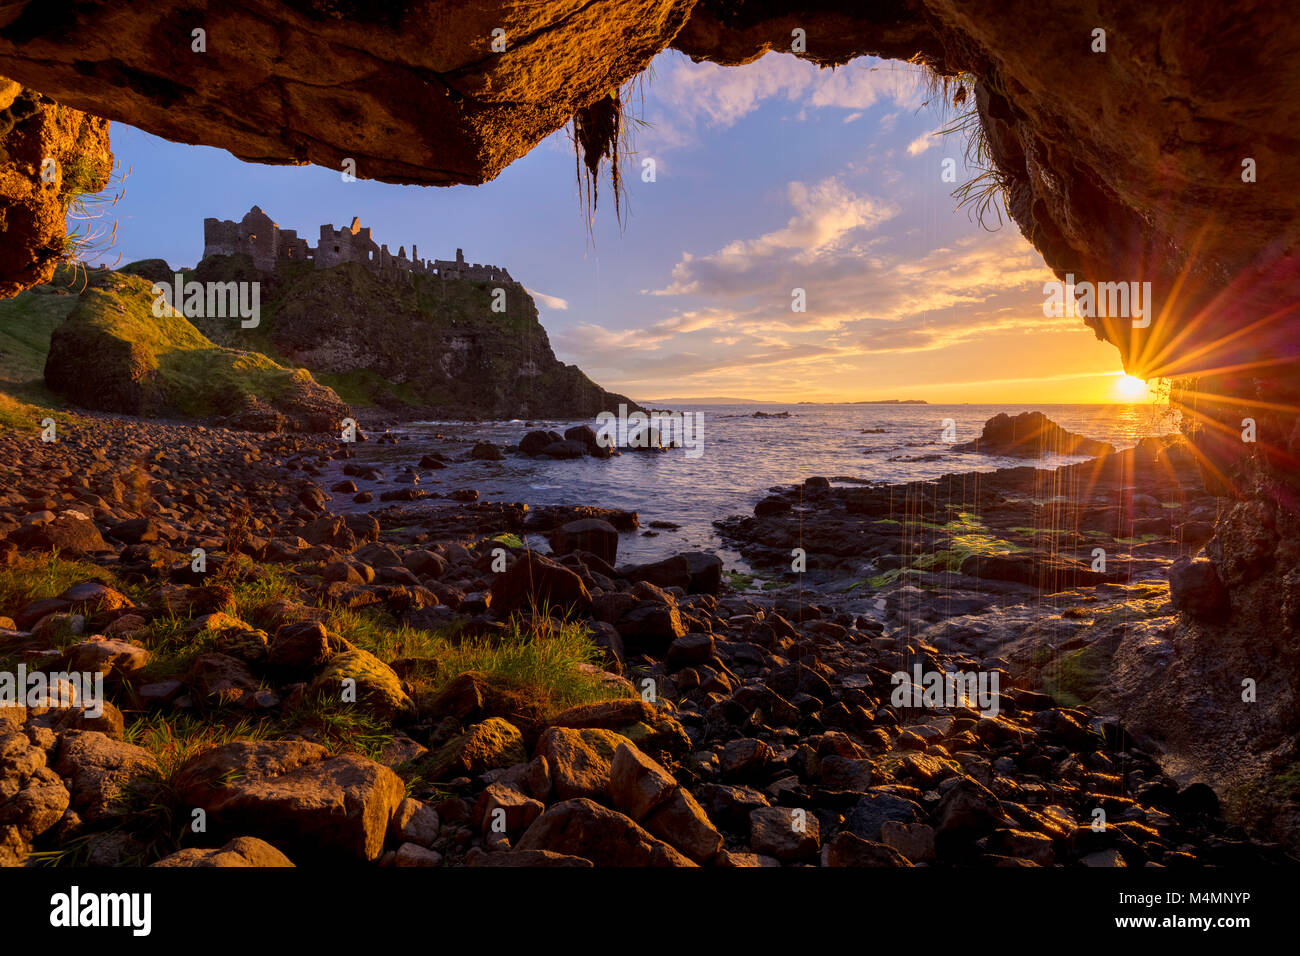 Sunset over Dunluce Castle from inside a sea cave. Causeway Coast, County Antrim, Northern Ireland. Stock Photo